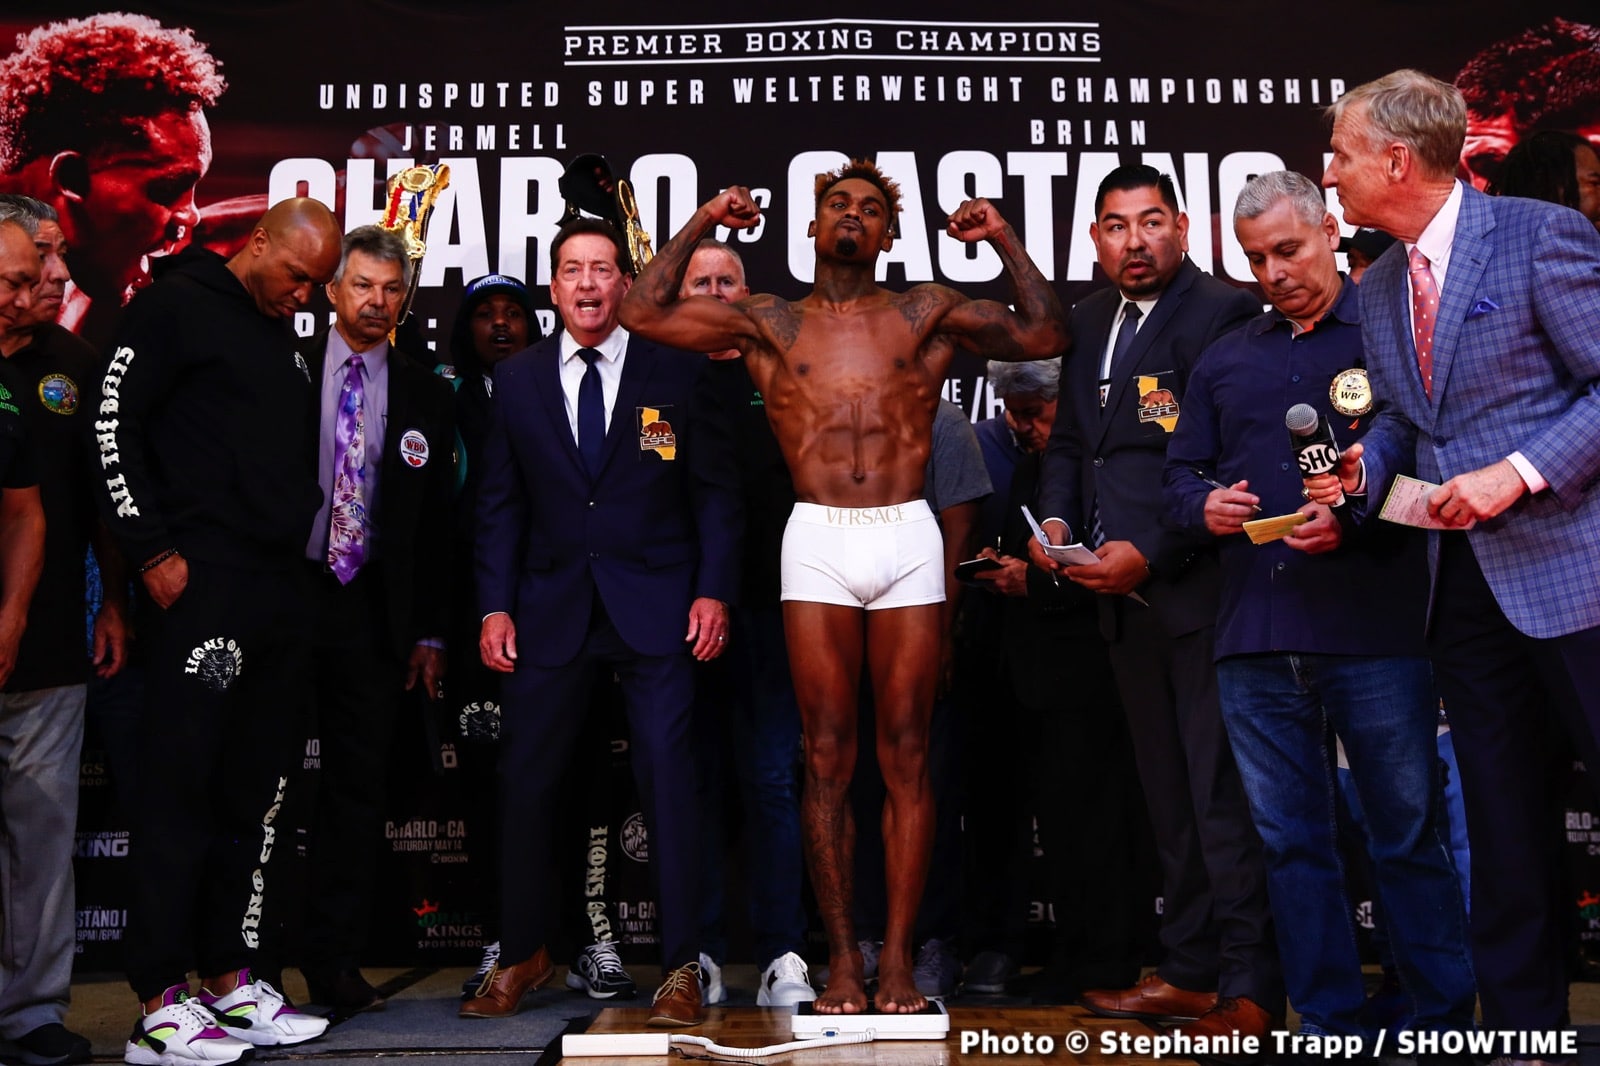 Jermell Charlo vs. Castano II - weights for Saturday on Showtime